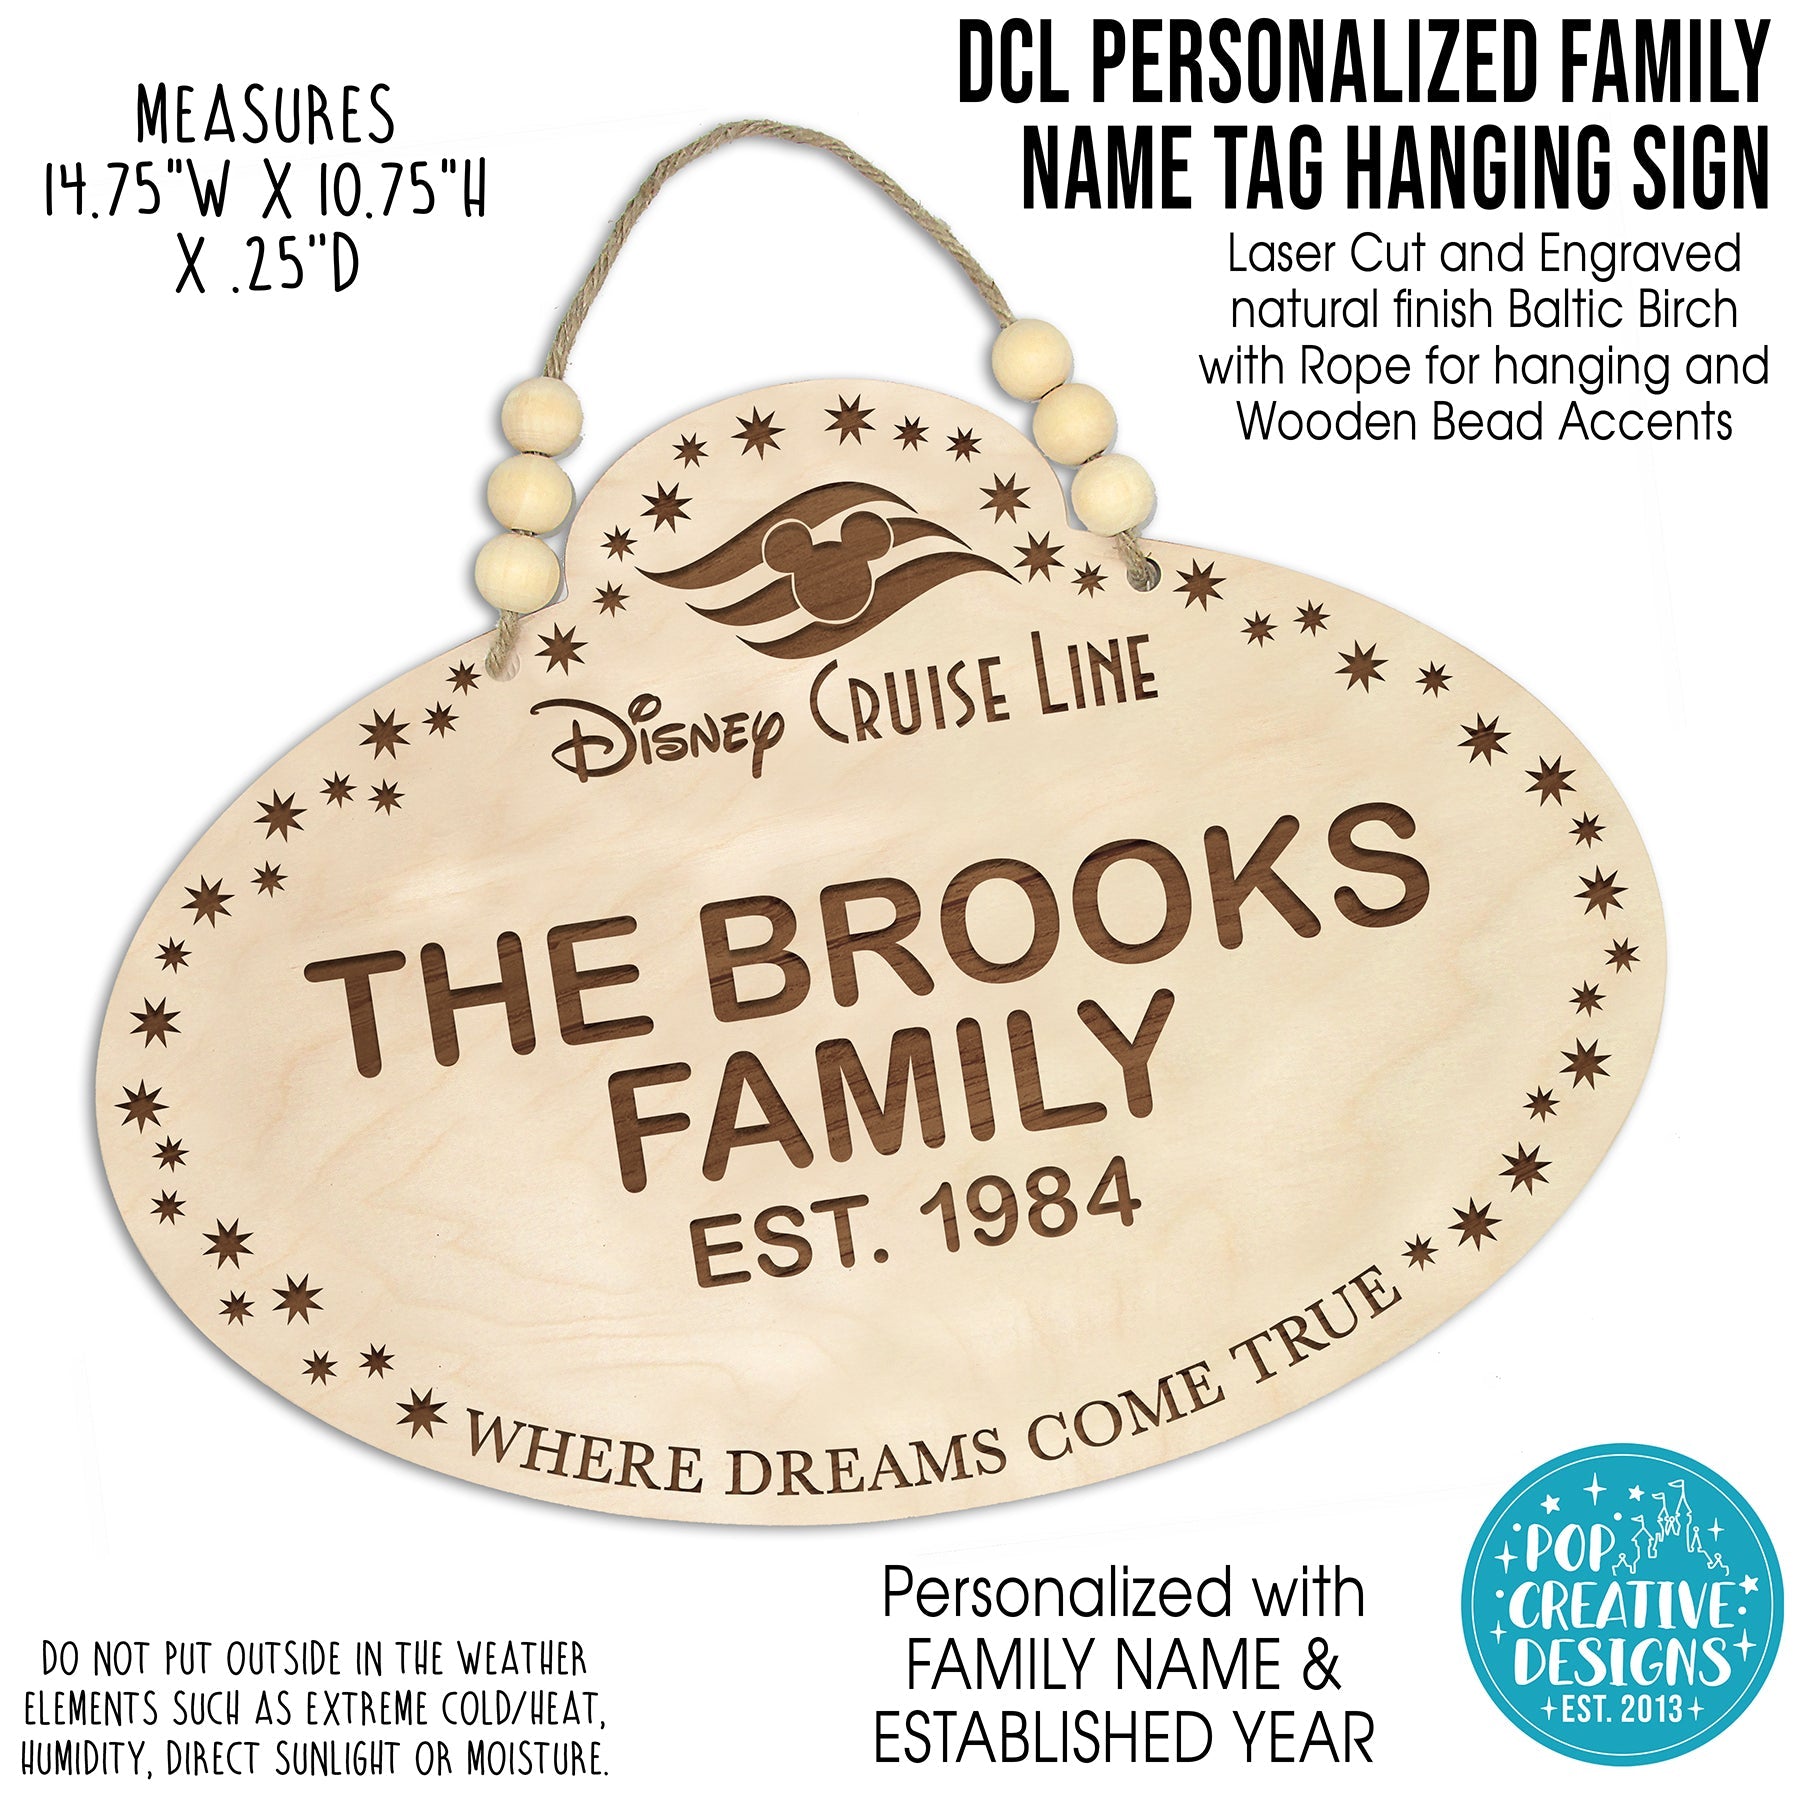 DCL Personalized Family Name Tag Hanging Sign - FREE SHIPPING